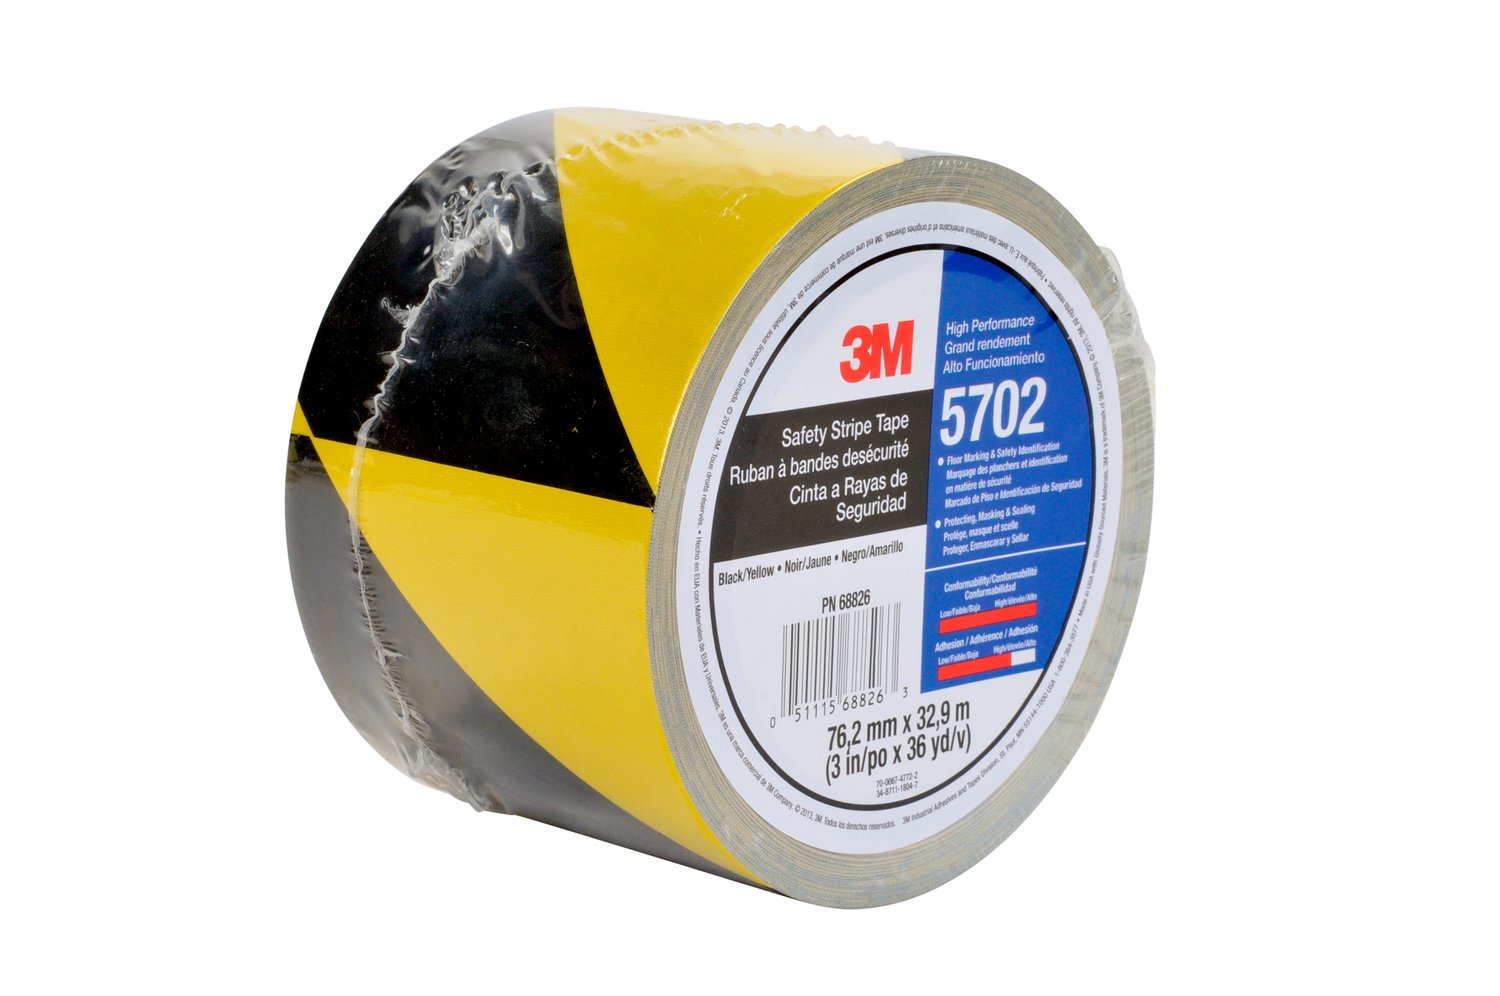 7010374979 - 3M Safety Stripe Vinyl Tape 5702, Black/Yellow, 3 in x 36 yd, 5.4 mil, 12 Roll/Case, Individually Wrapped Conveniently Packaged